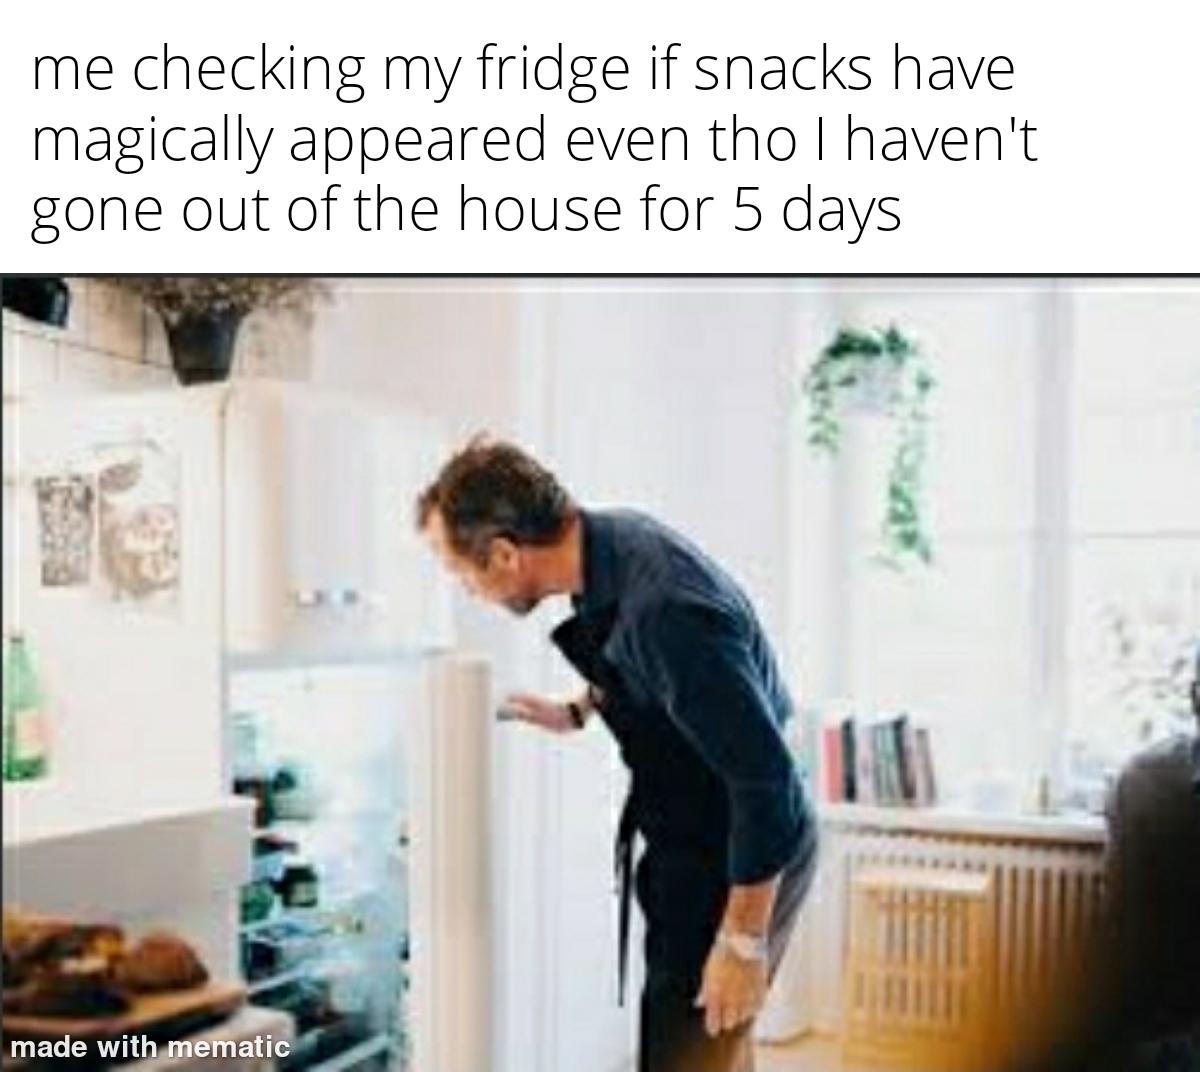 person opening fridge drawing - me checking my fridge if snacks have magically appeared even tho I haven't gone out of the house for 5 days made with mematic